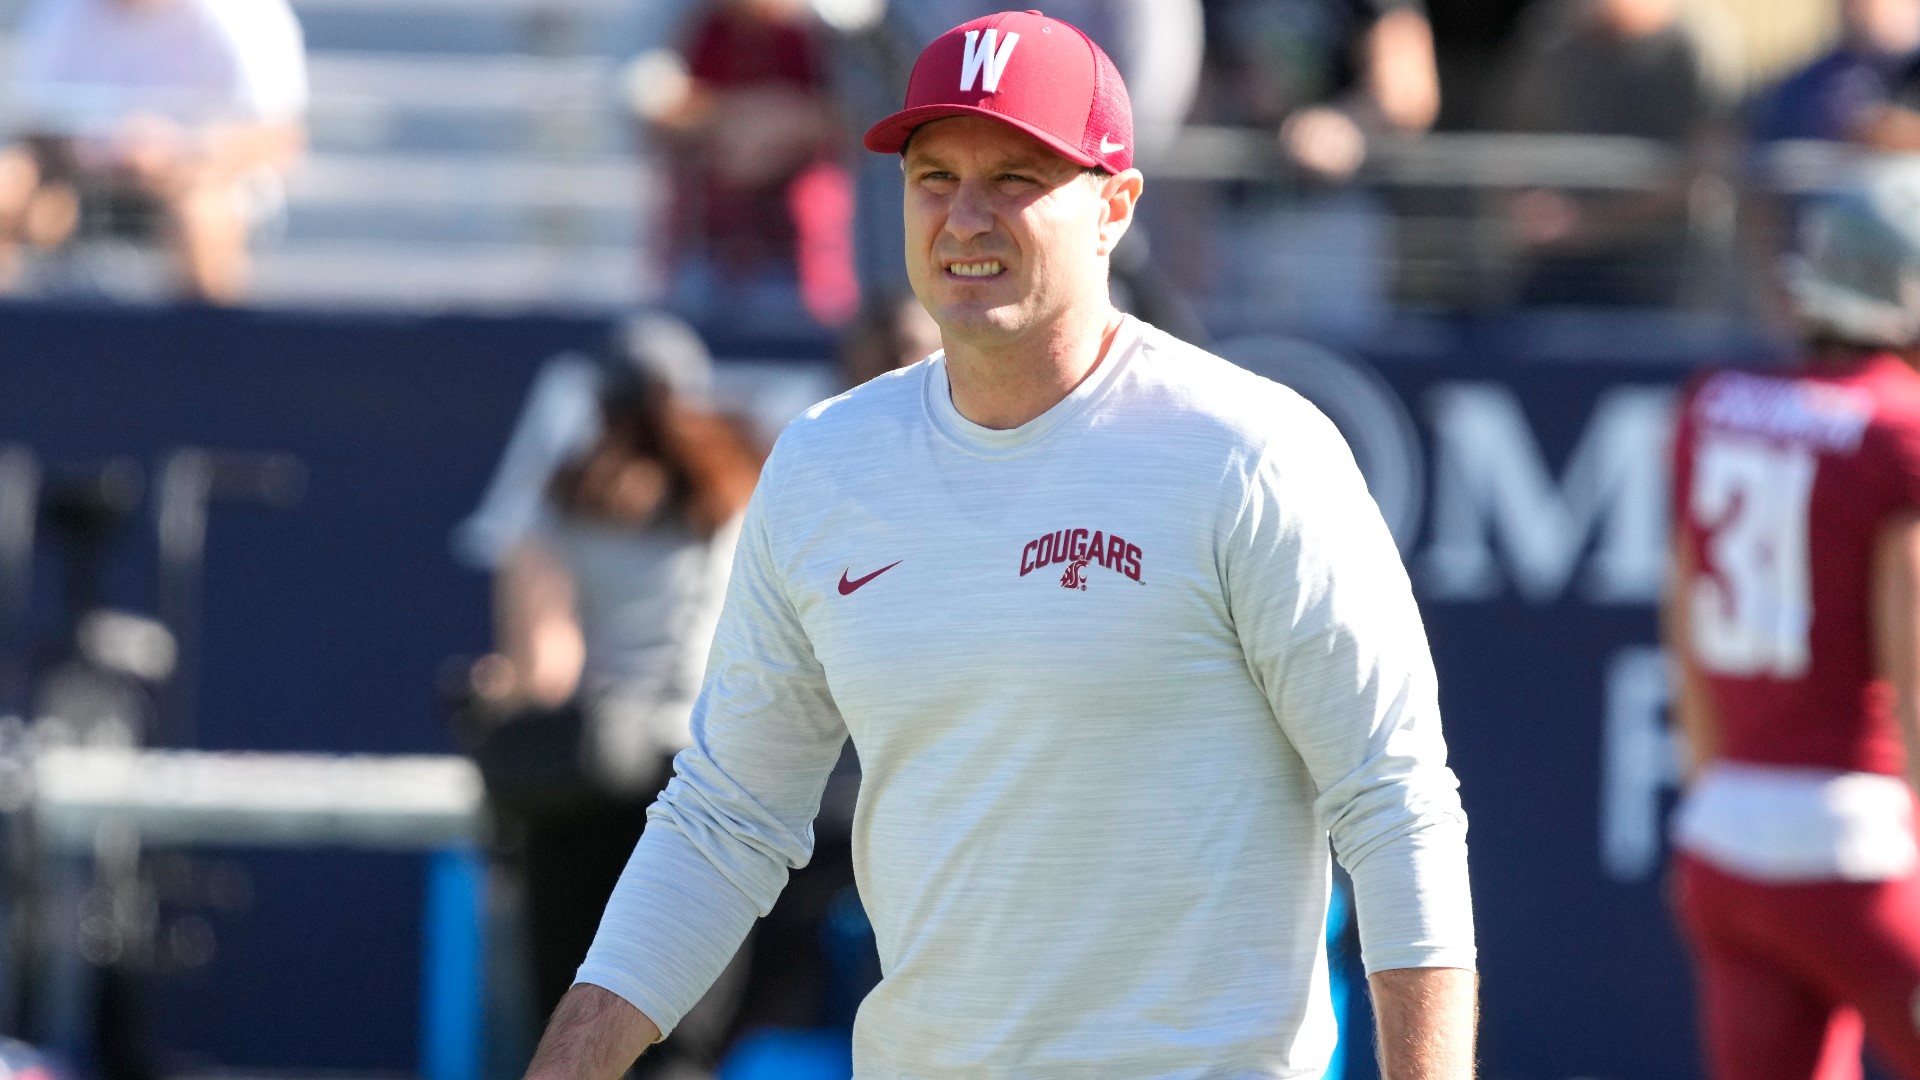 The Cougs are hoping to get the jitters out of the way early on Saturday and will do so against CSU, whom they beat 38-7 in Pullman last season.